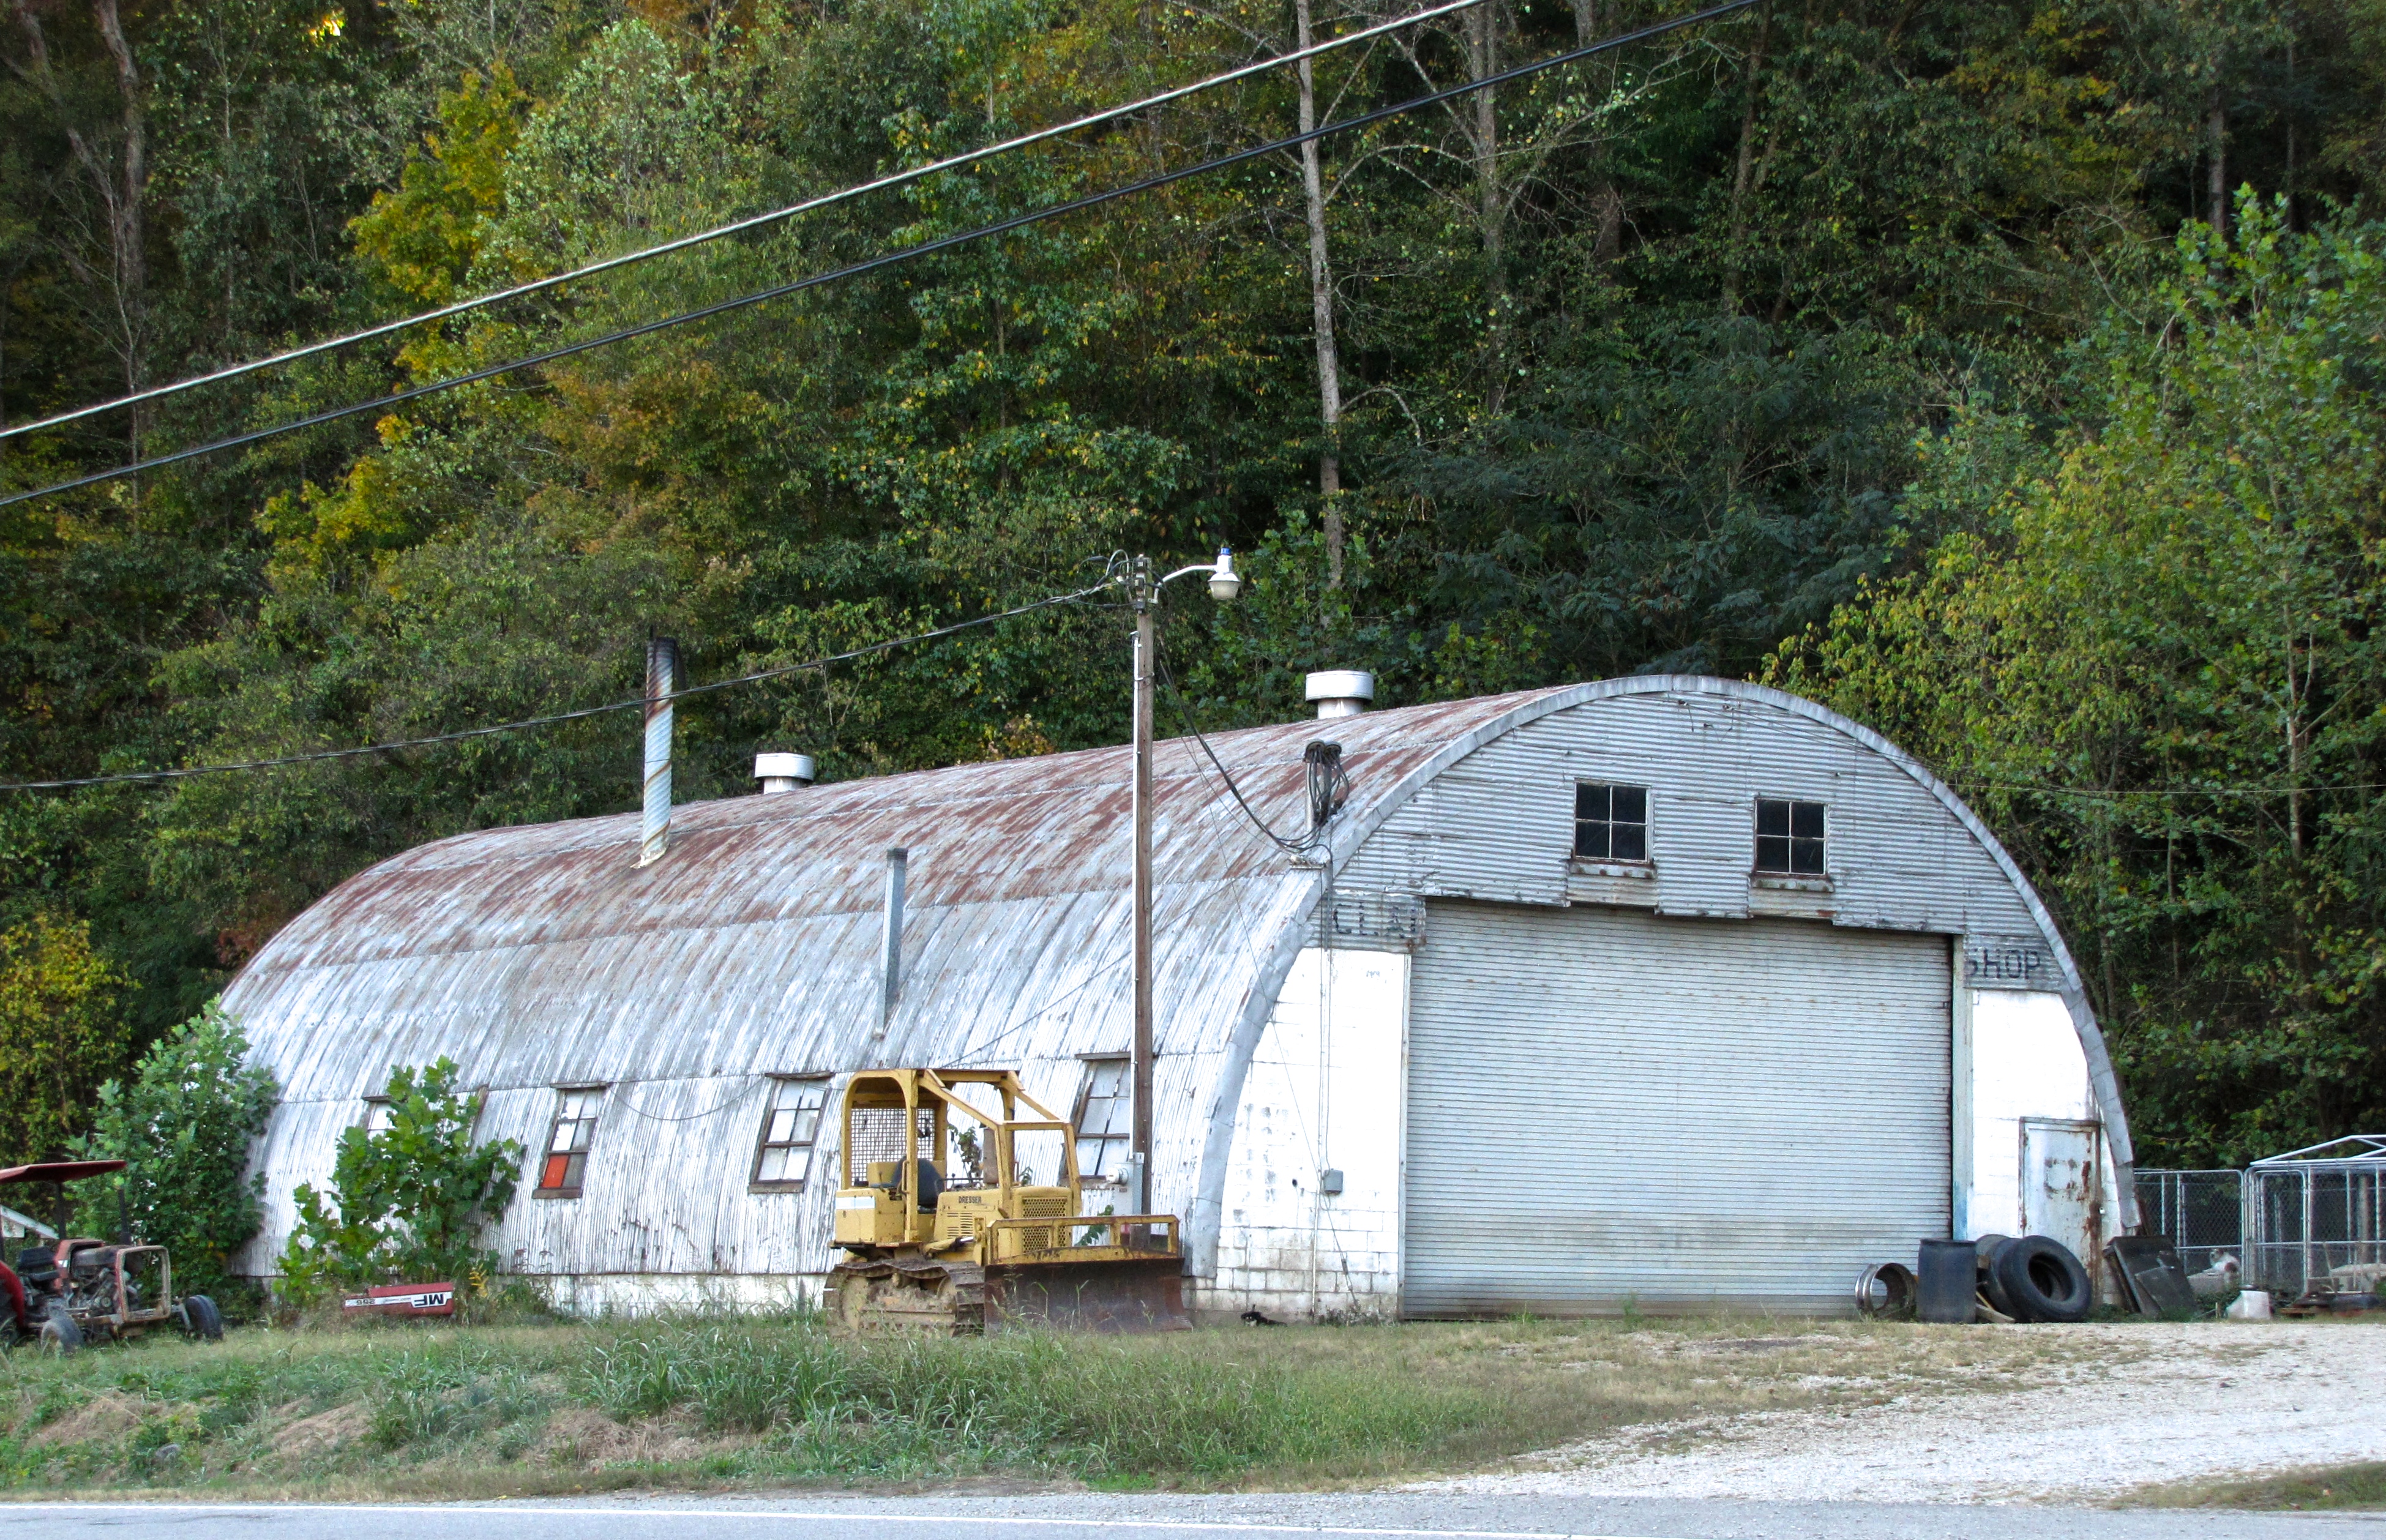 quonset hut in New Fairfield, CT